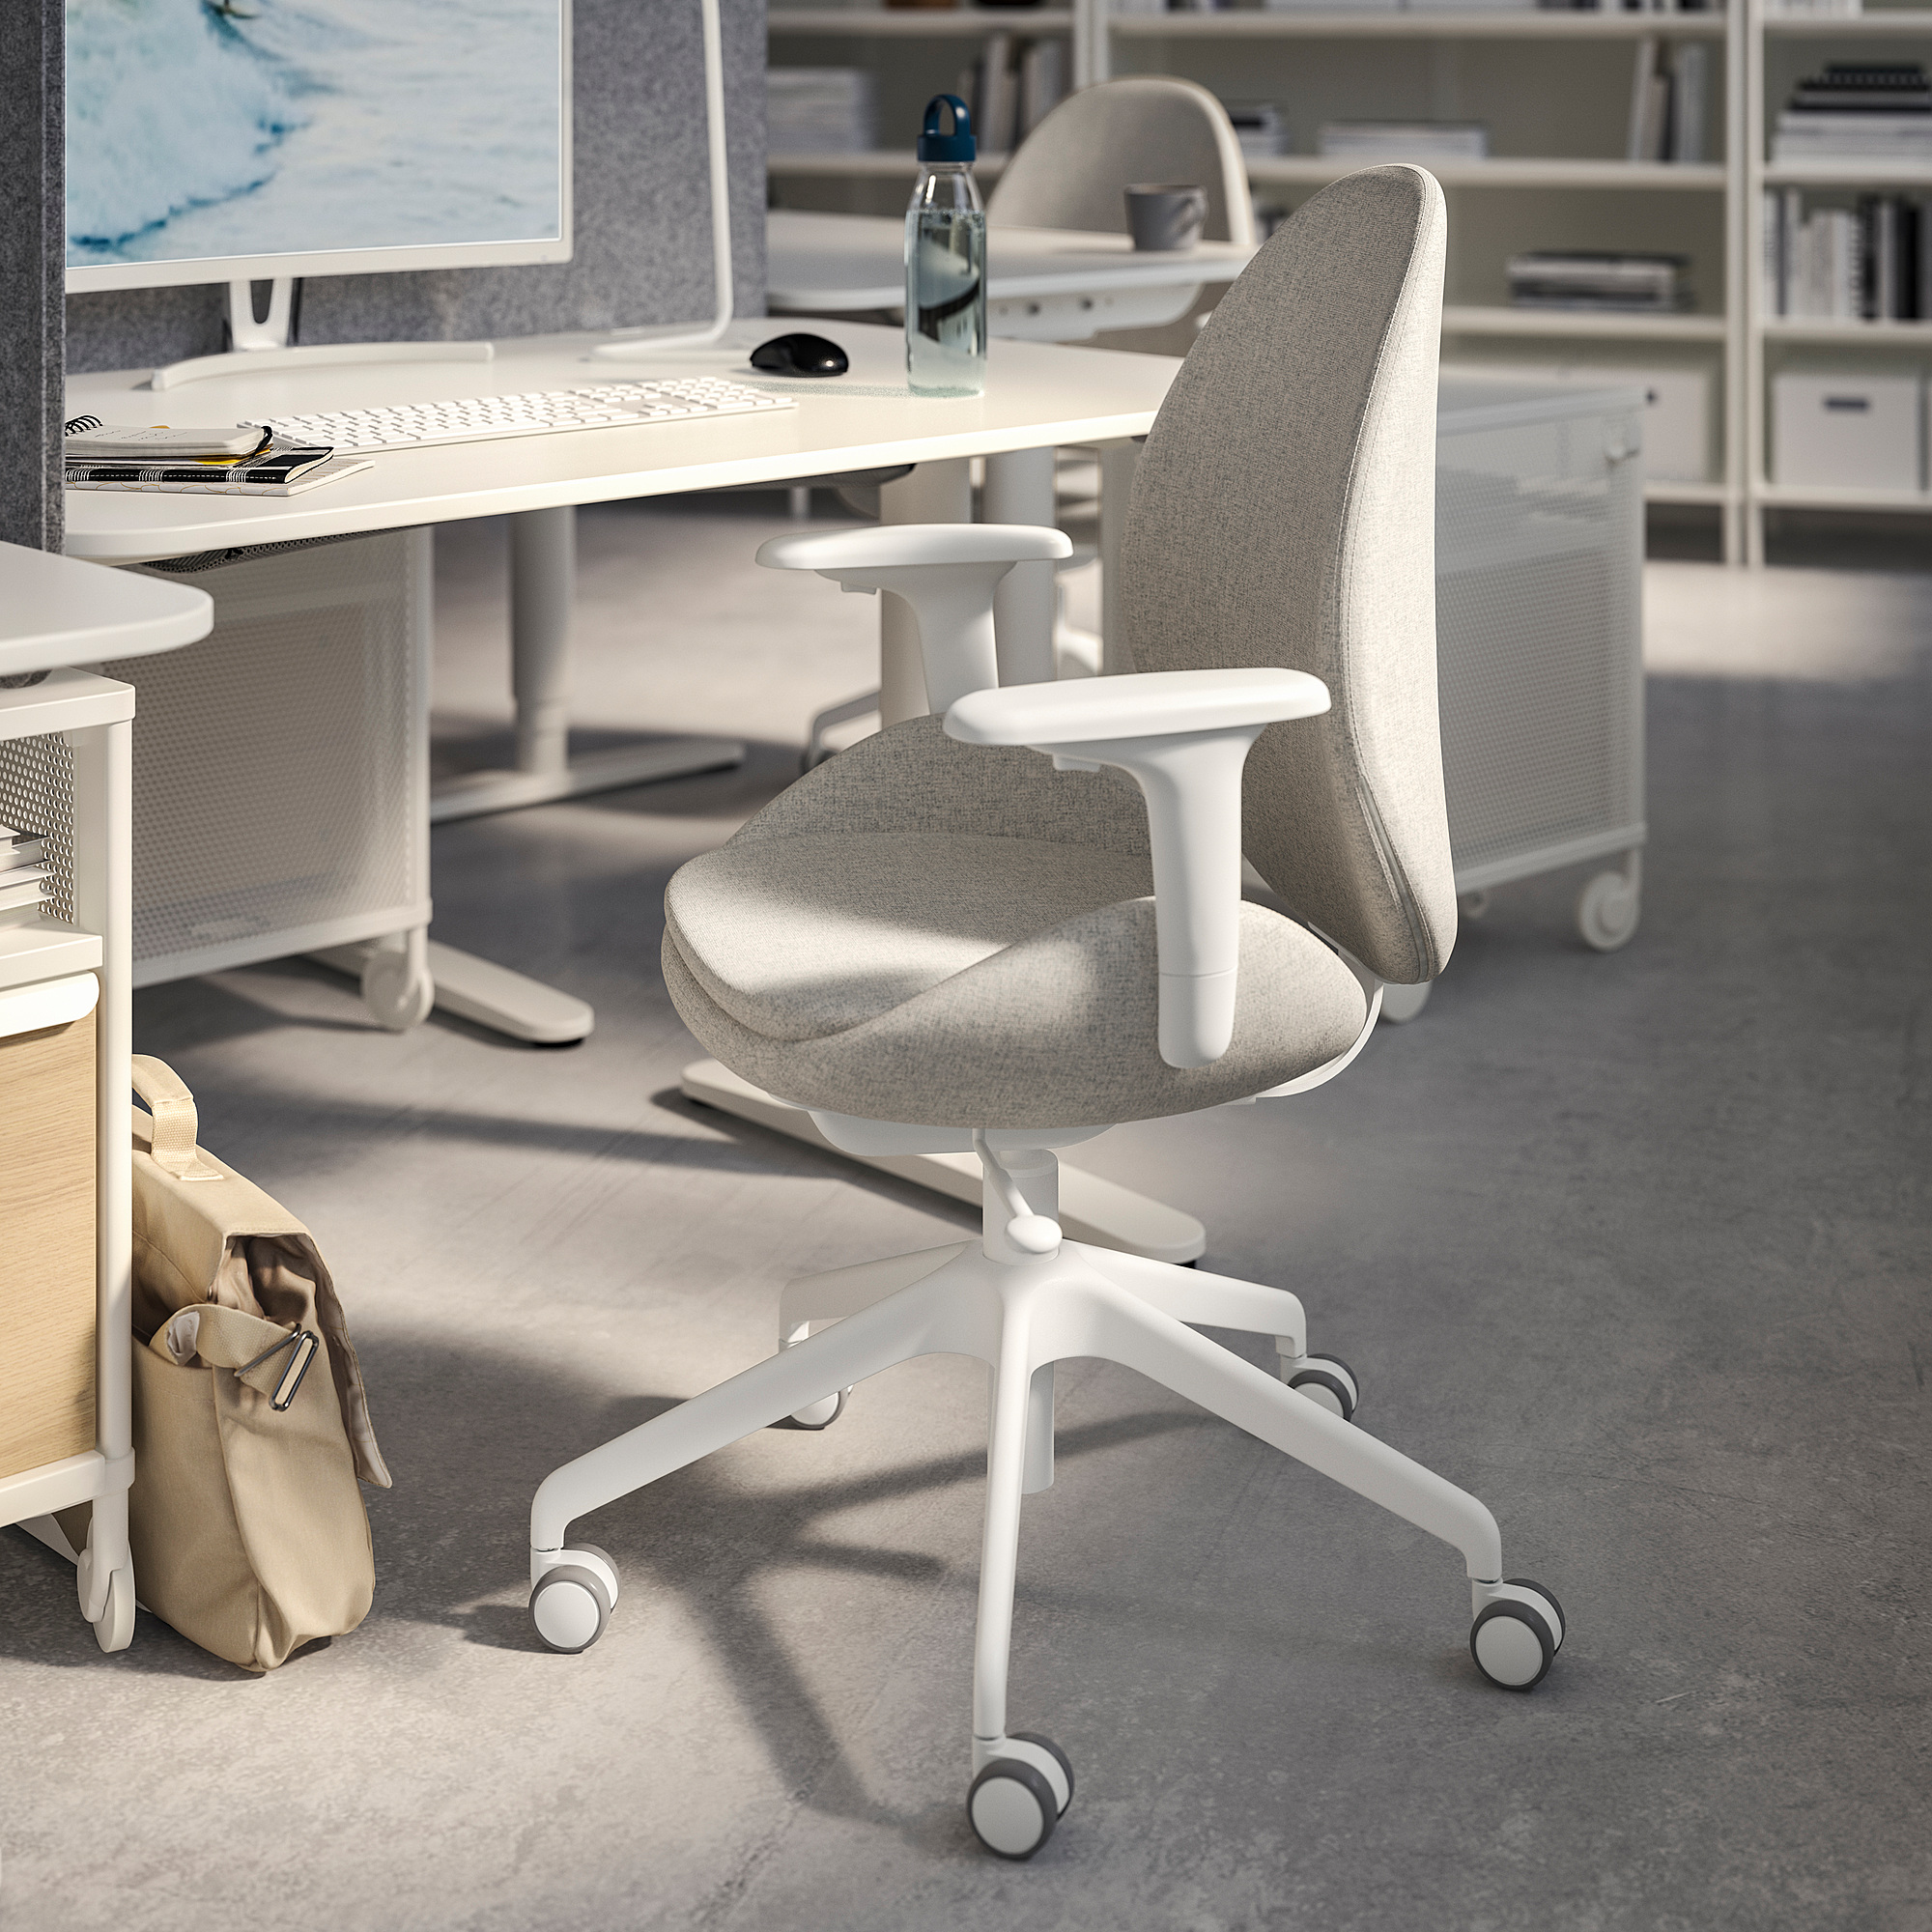 HATTEFJÄLL office chair with armrests